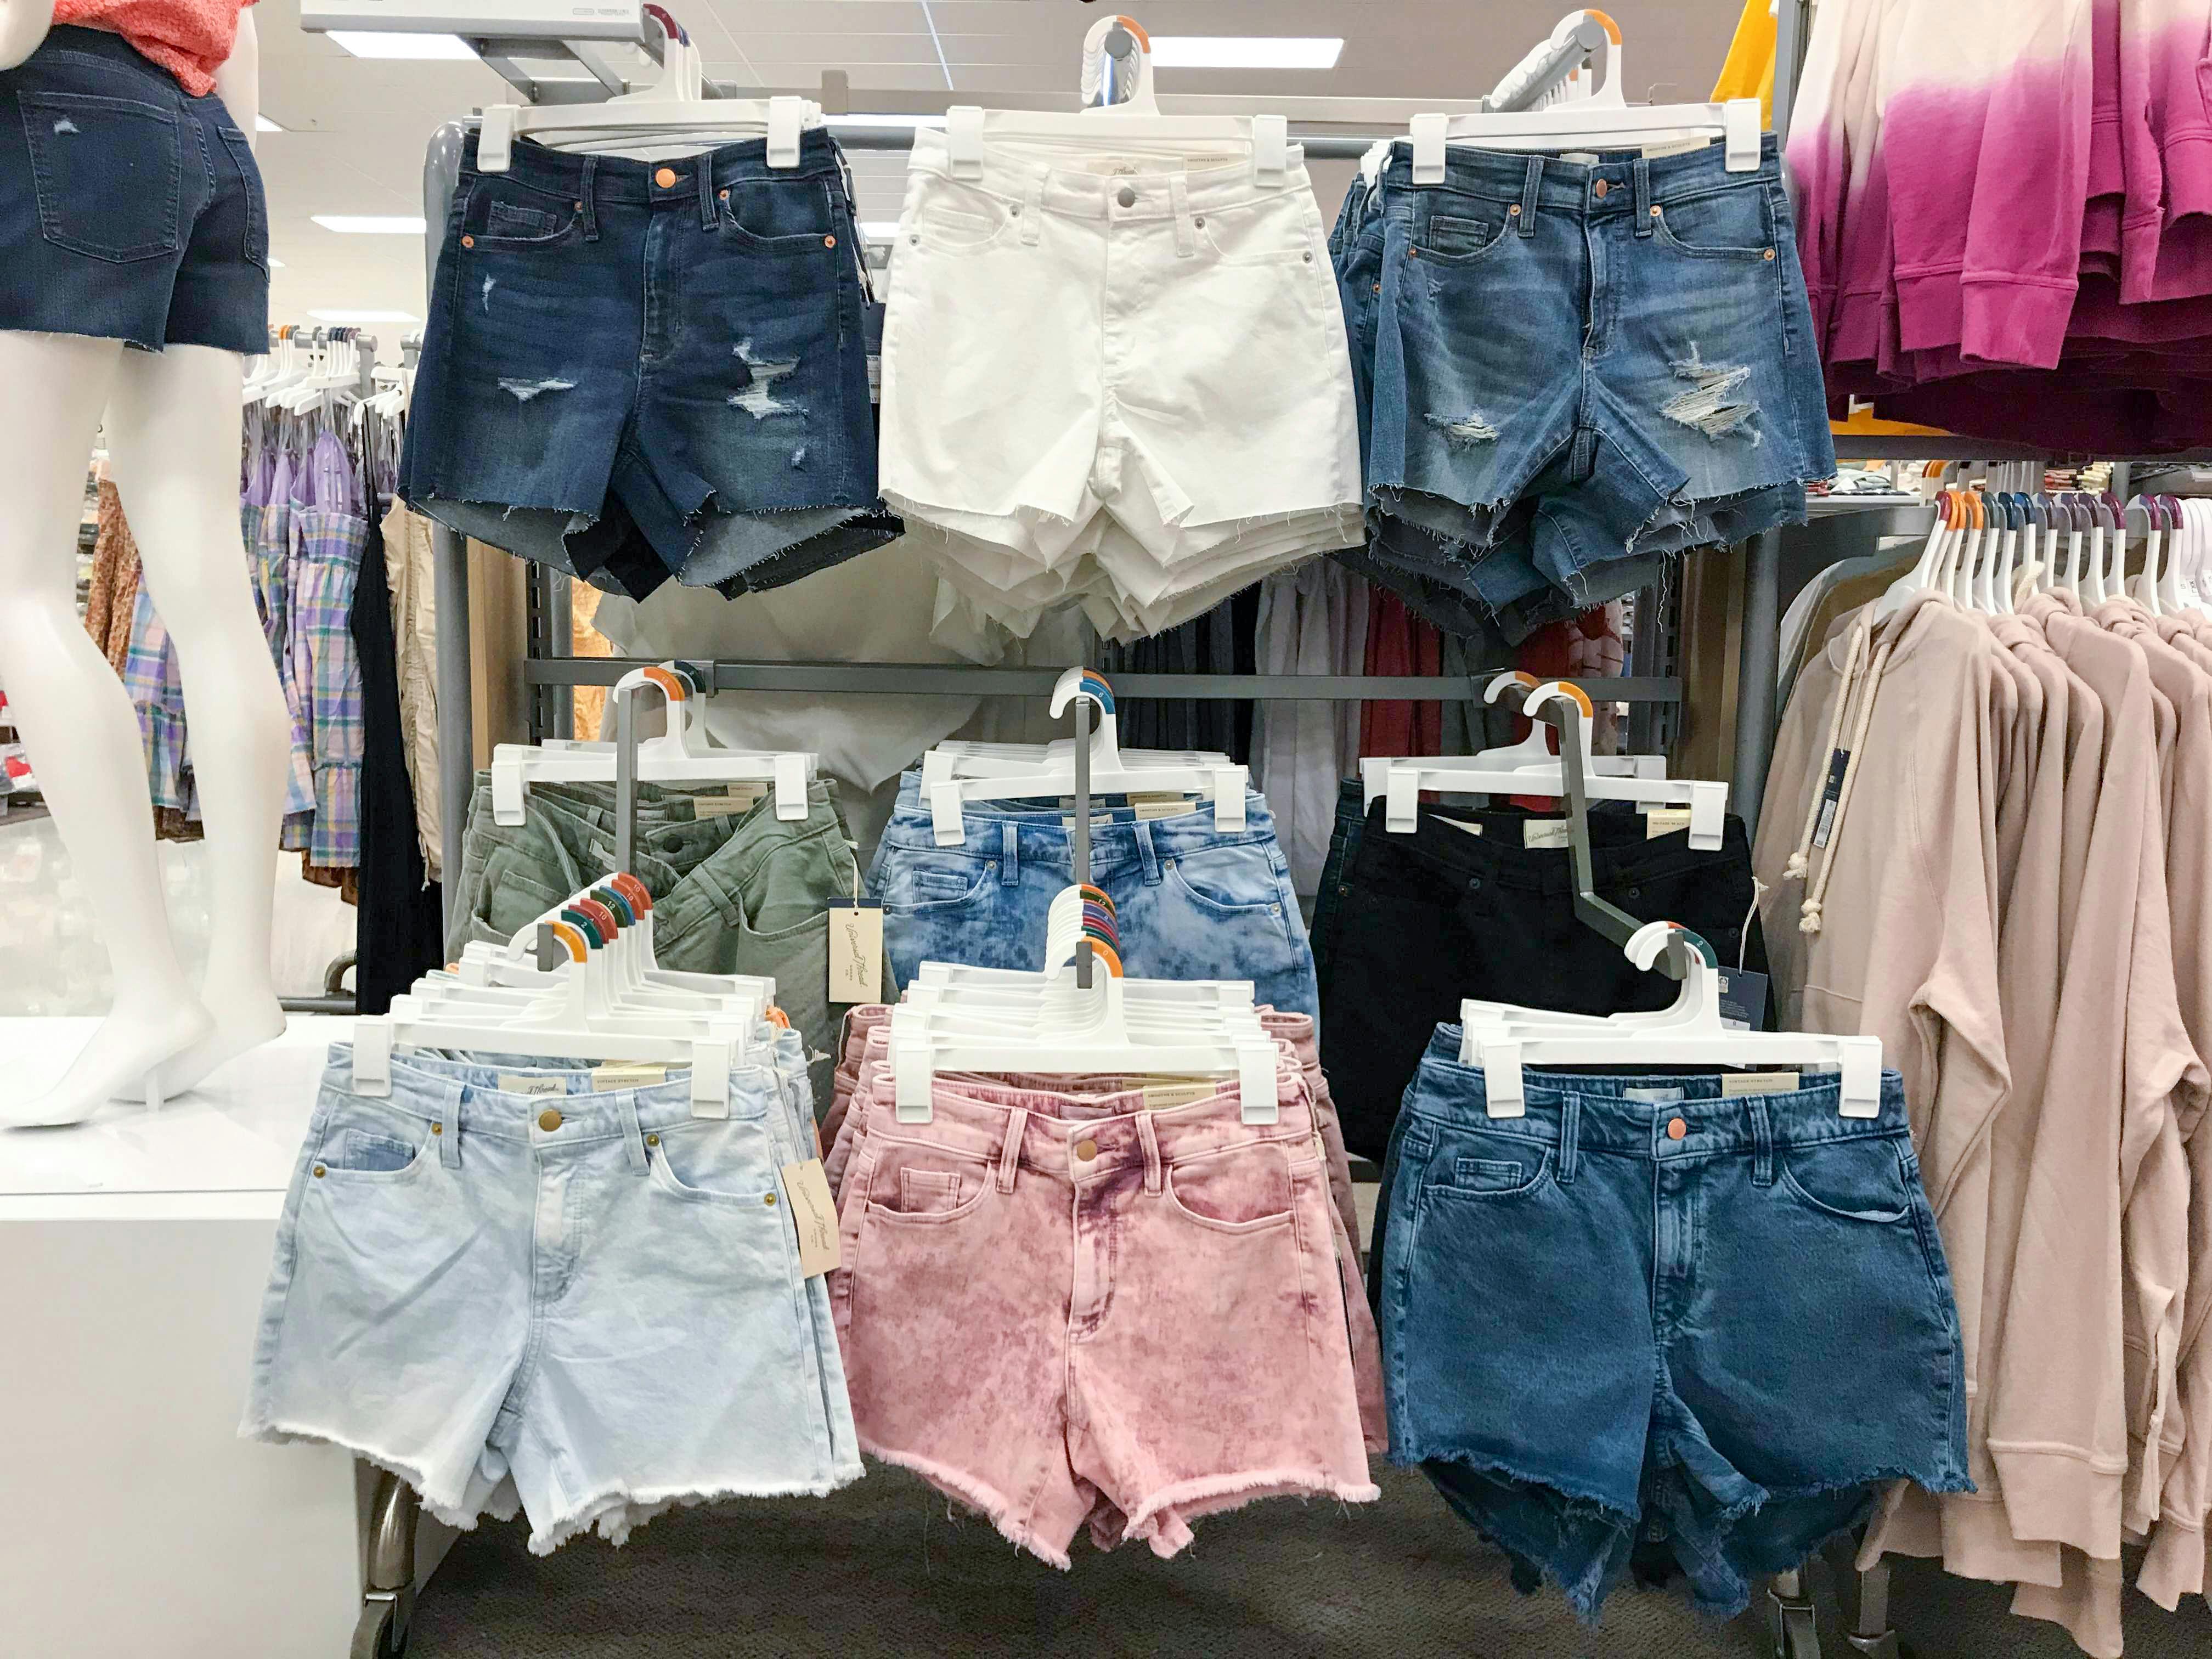 Women's Jean Shorts, Only $11.40 at Target - The Krazy Coupon Lady